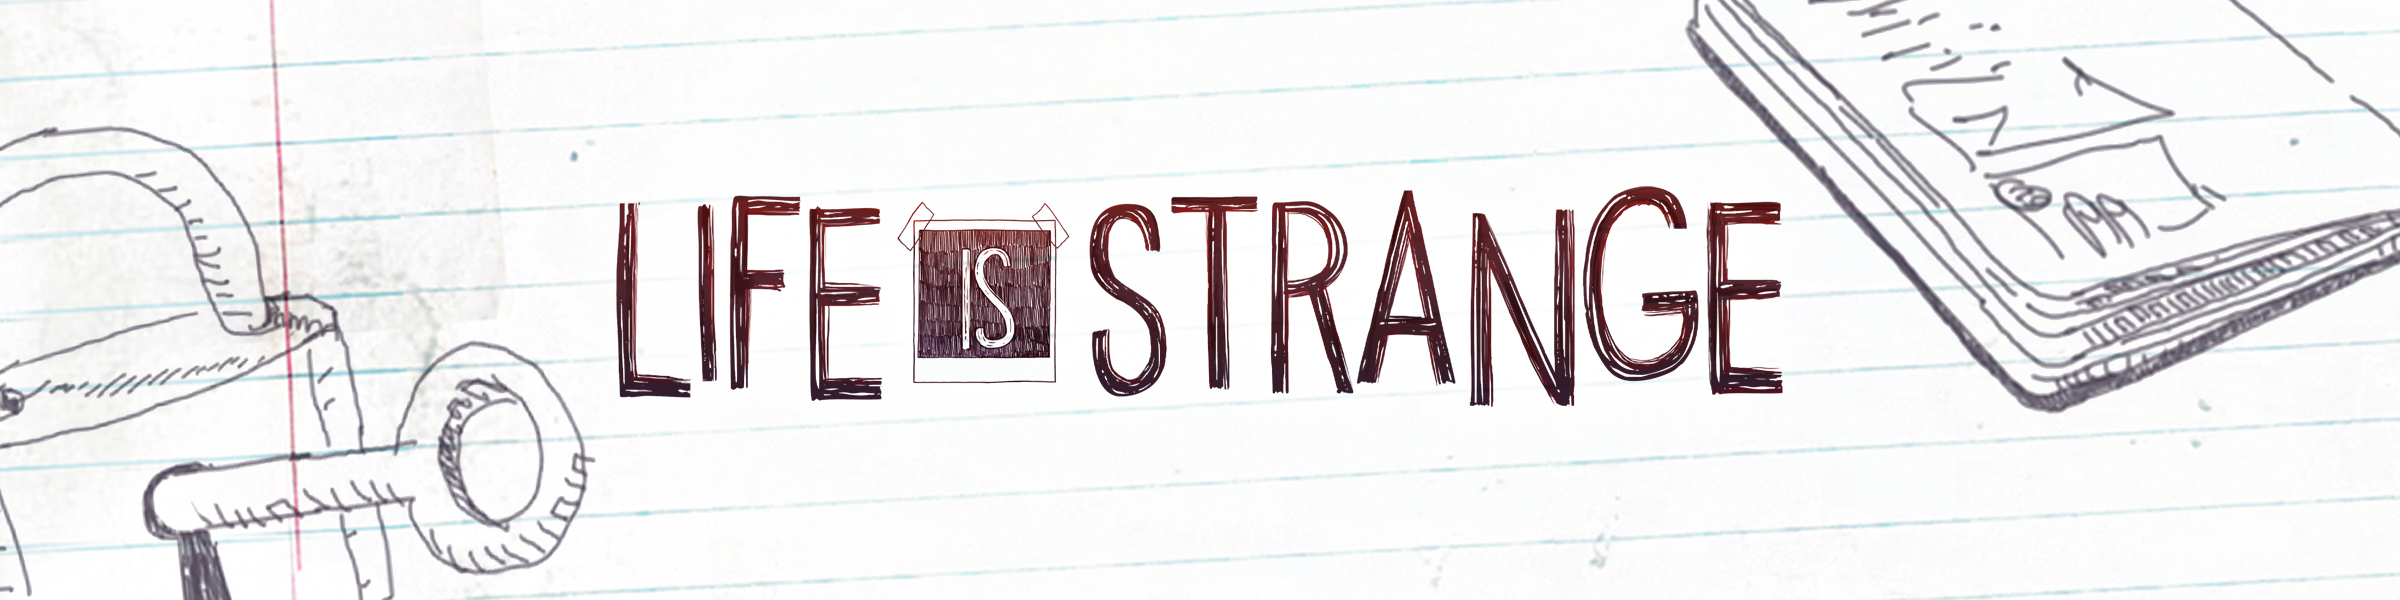 The Officially Licensed Life is Strange Merchandise Collection